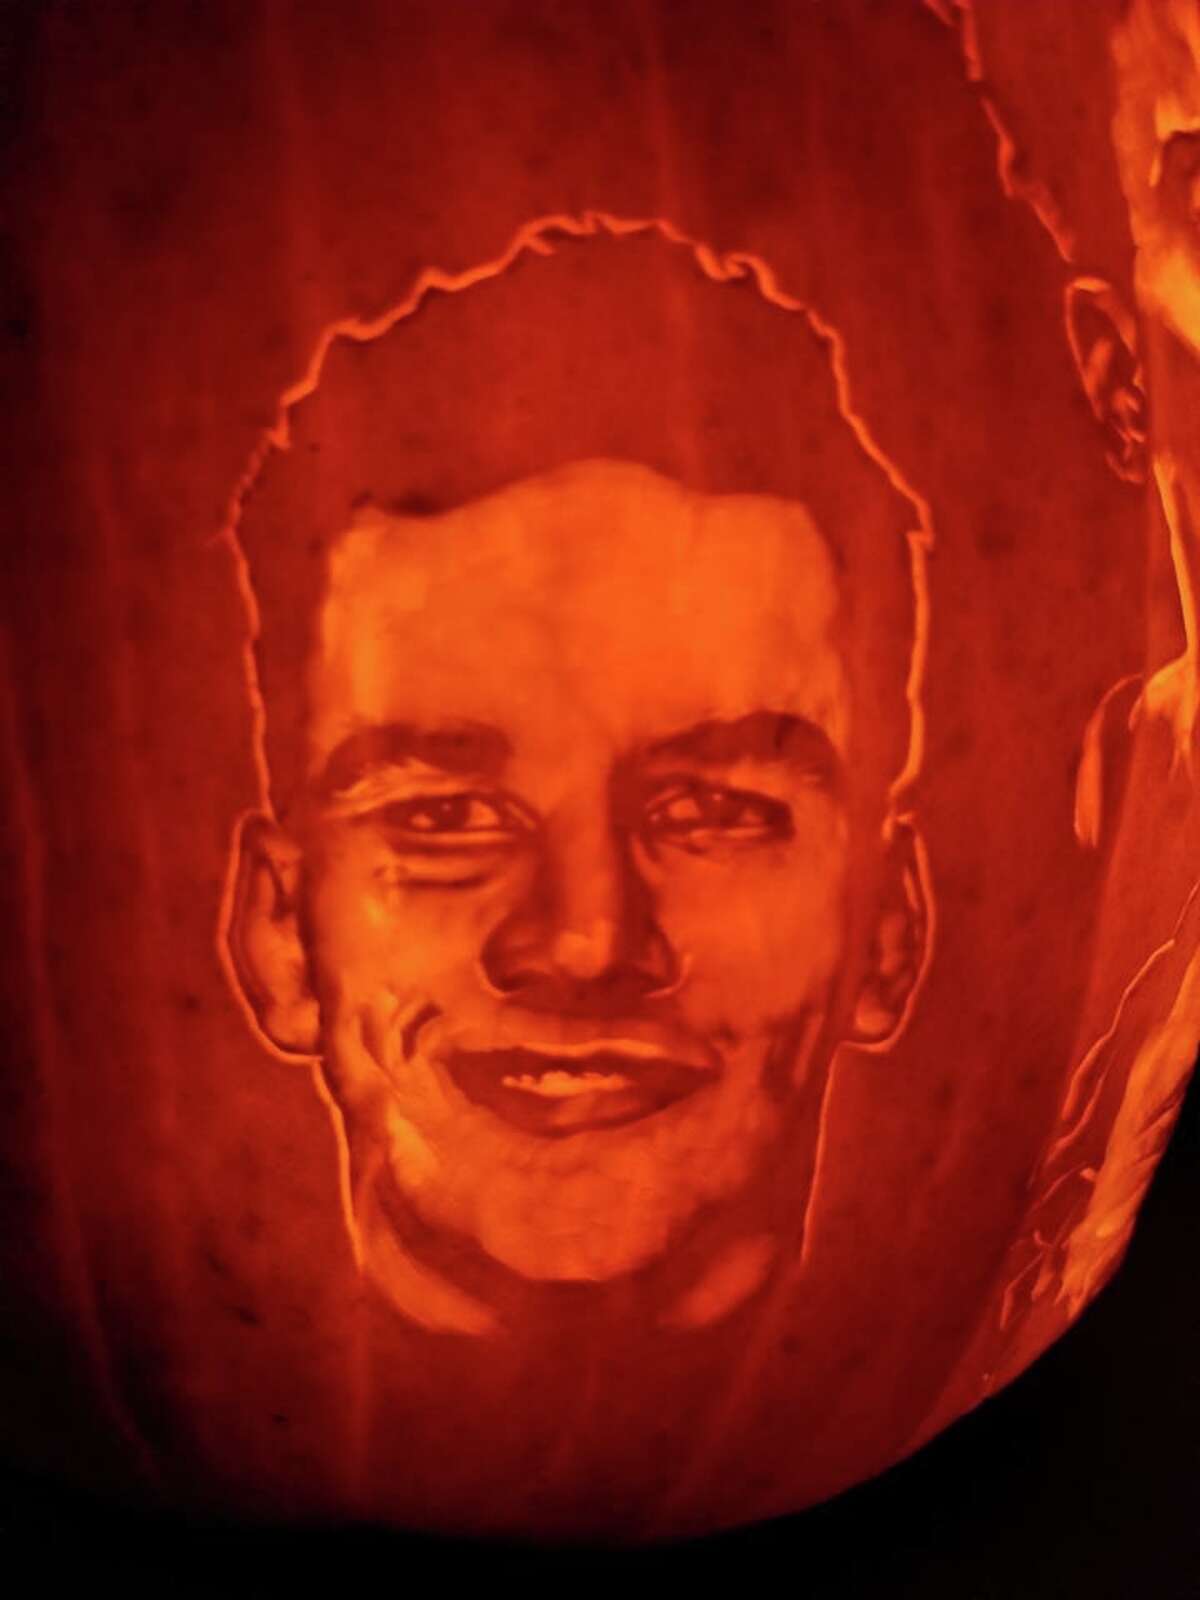 Arthur Alaquinez is San Antonio's standout pumpkin carving artist this fall. He grabbed social media attention in early October when he created an impressive Manu Ginobili carving. This week, he carved the Spurs starting roster.